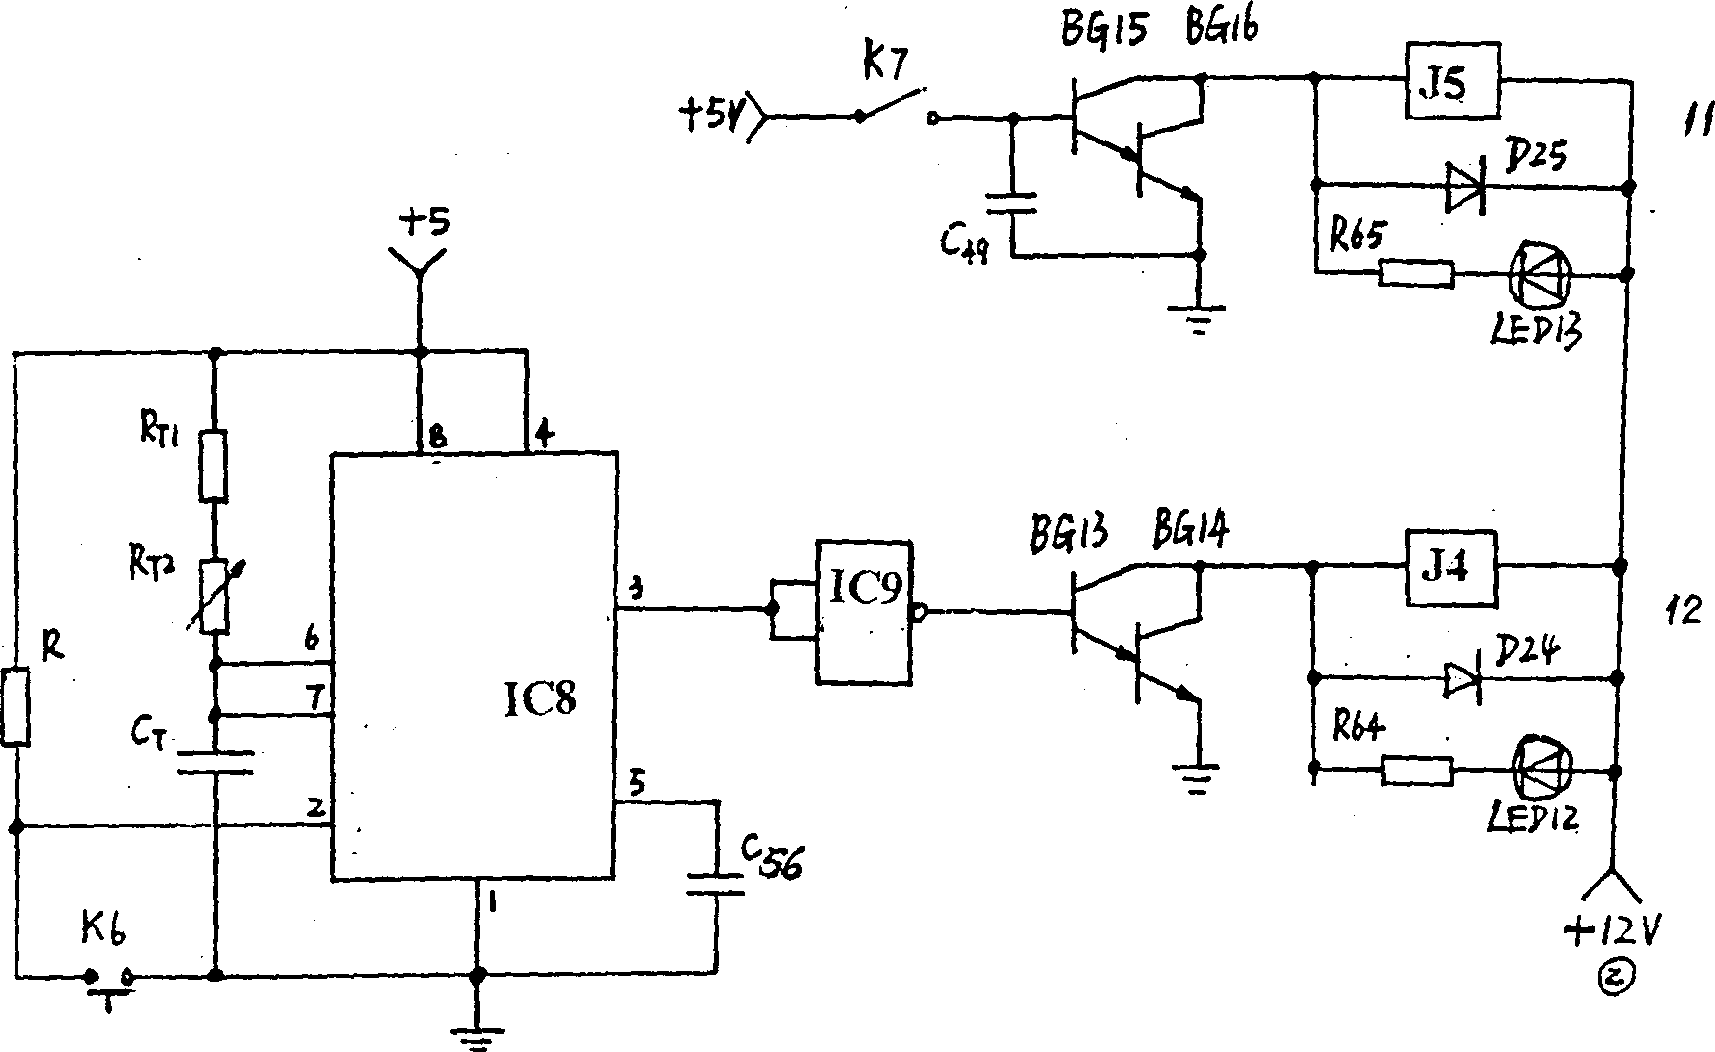 Control system for three-phase motor